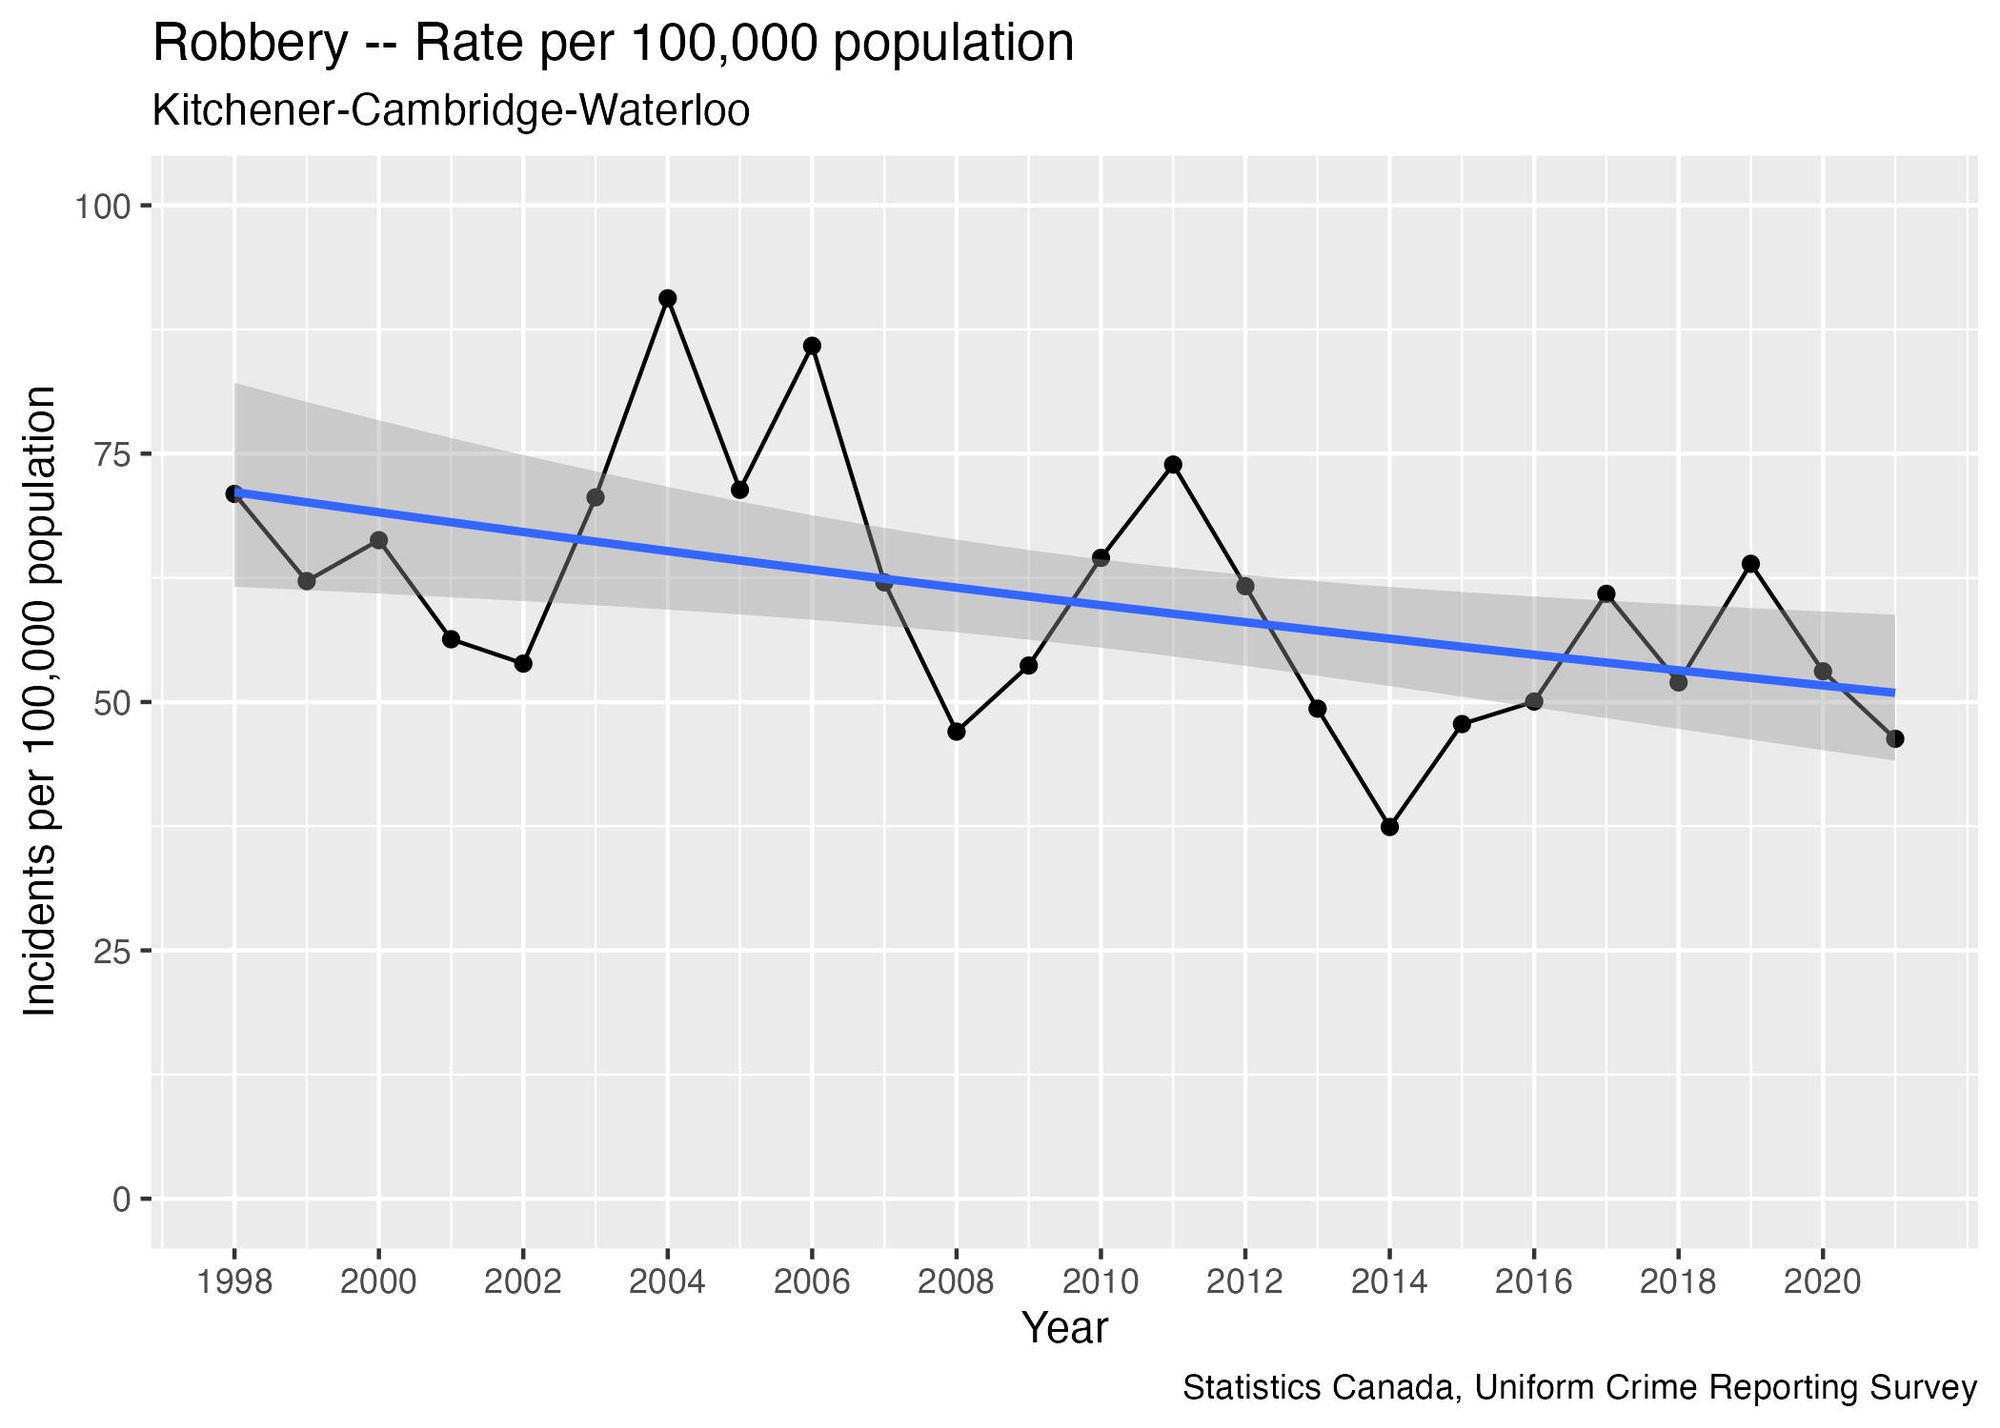 A graph of “Robbery – Rate per 100,000 population” for Kitchener-Cambridge-Waterloo. The graph jumps erratically within a range between roughly 40-90 over the time period 1998-2021.A blue line, nearly slighly decreasing, has been overlaid on the years 1998-2021.